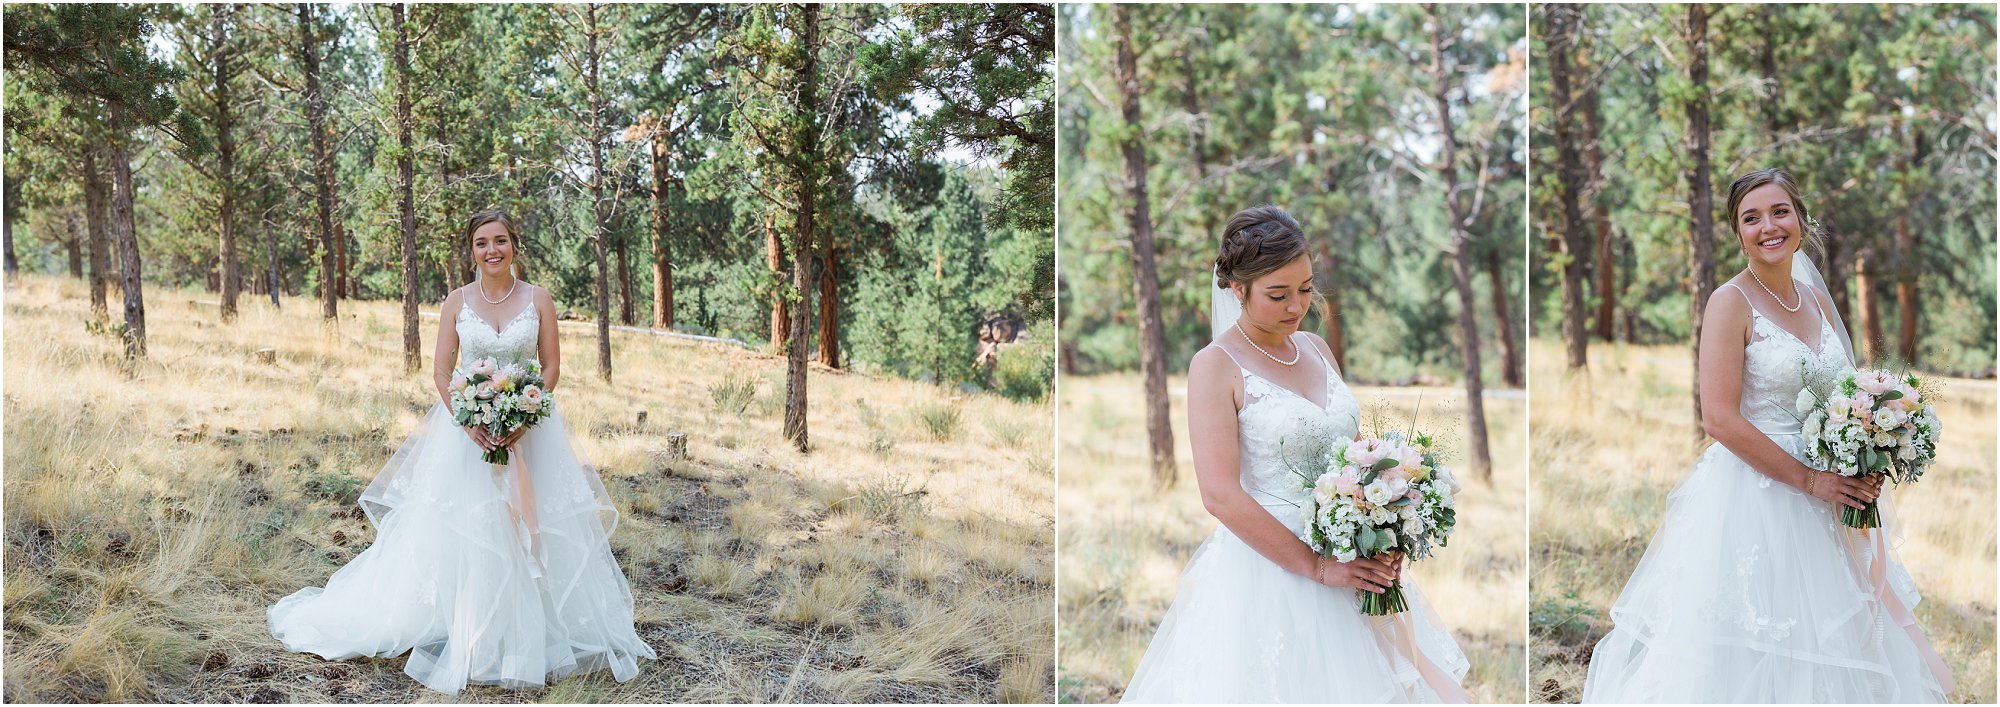 Stunning bridal portraits at the gorgeous Rock Springs Ranch Wedding venue near Bend, OR. | Erica Swantek Photography